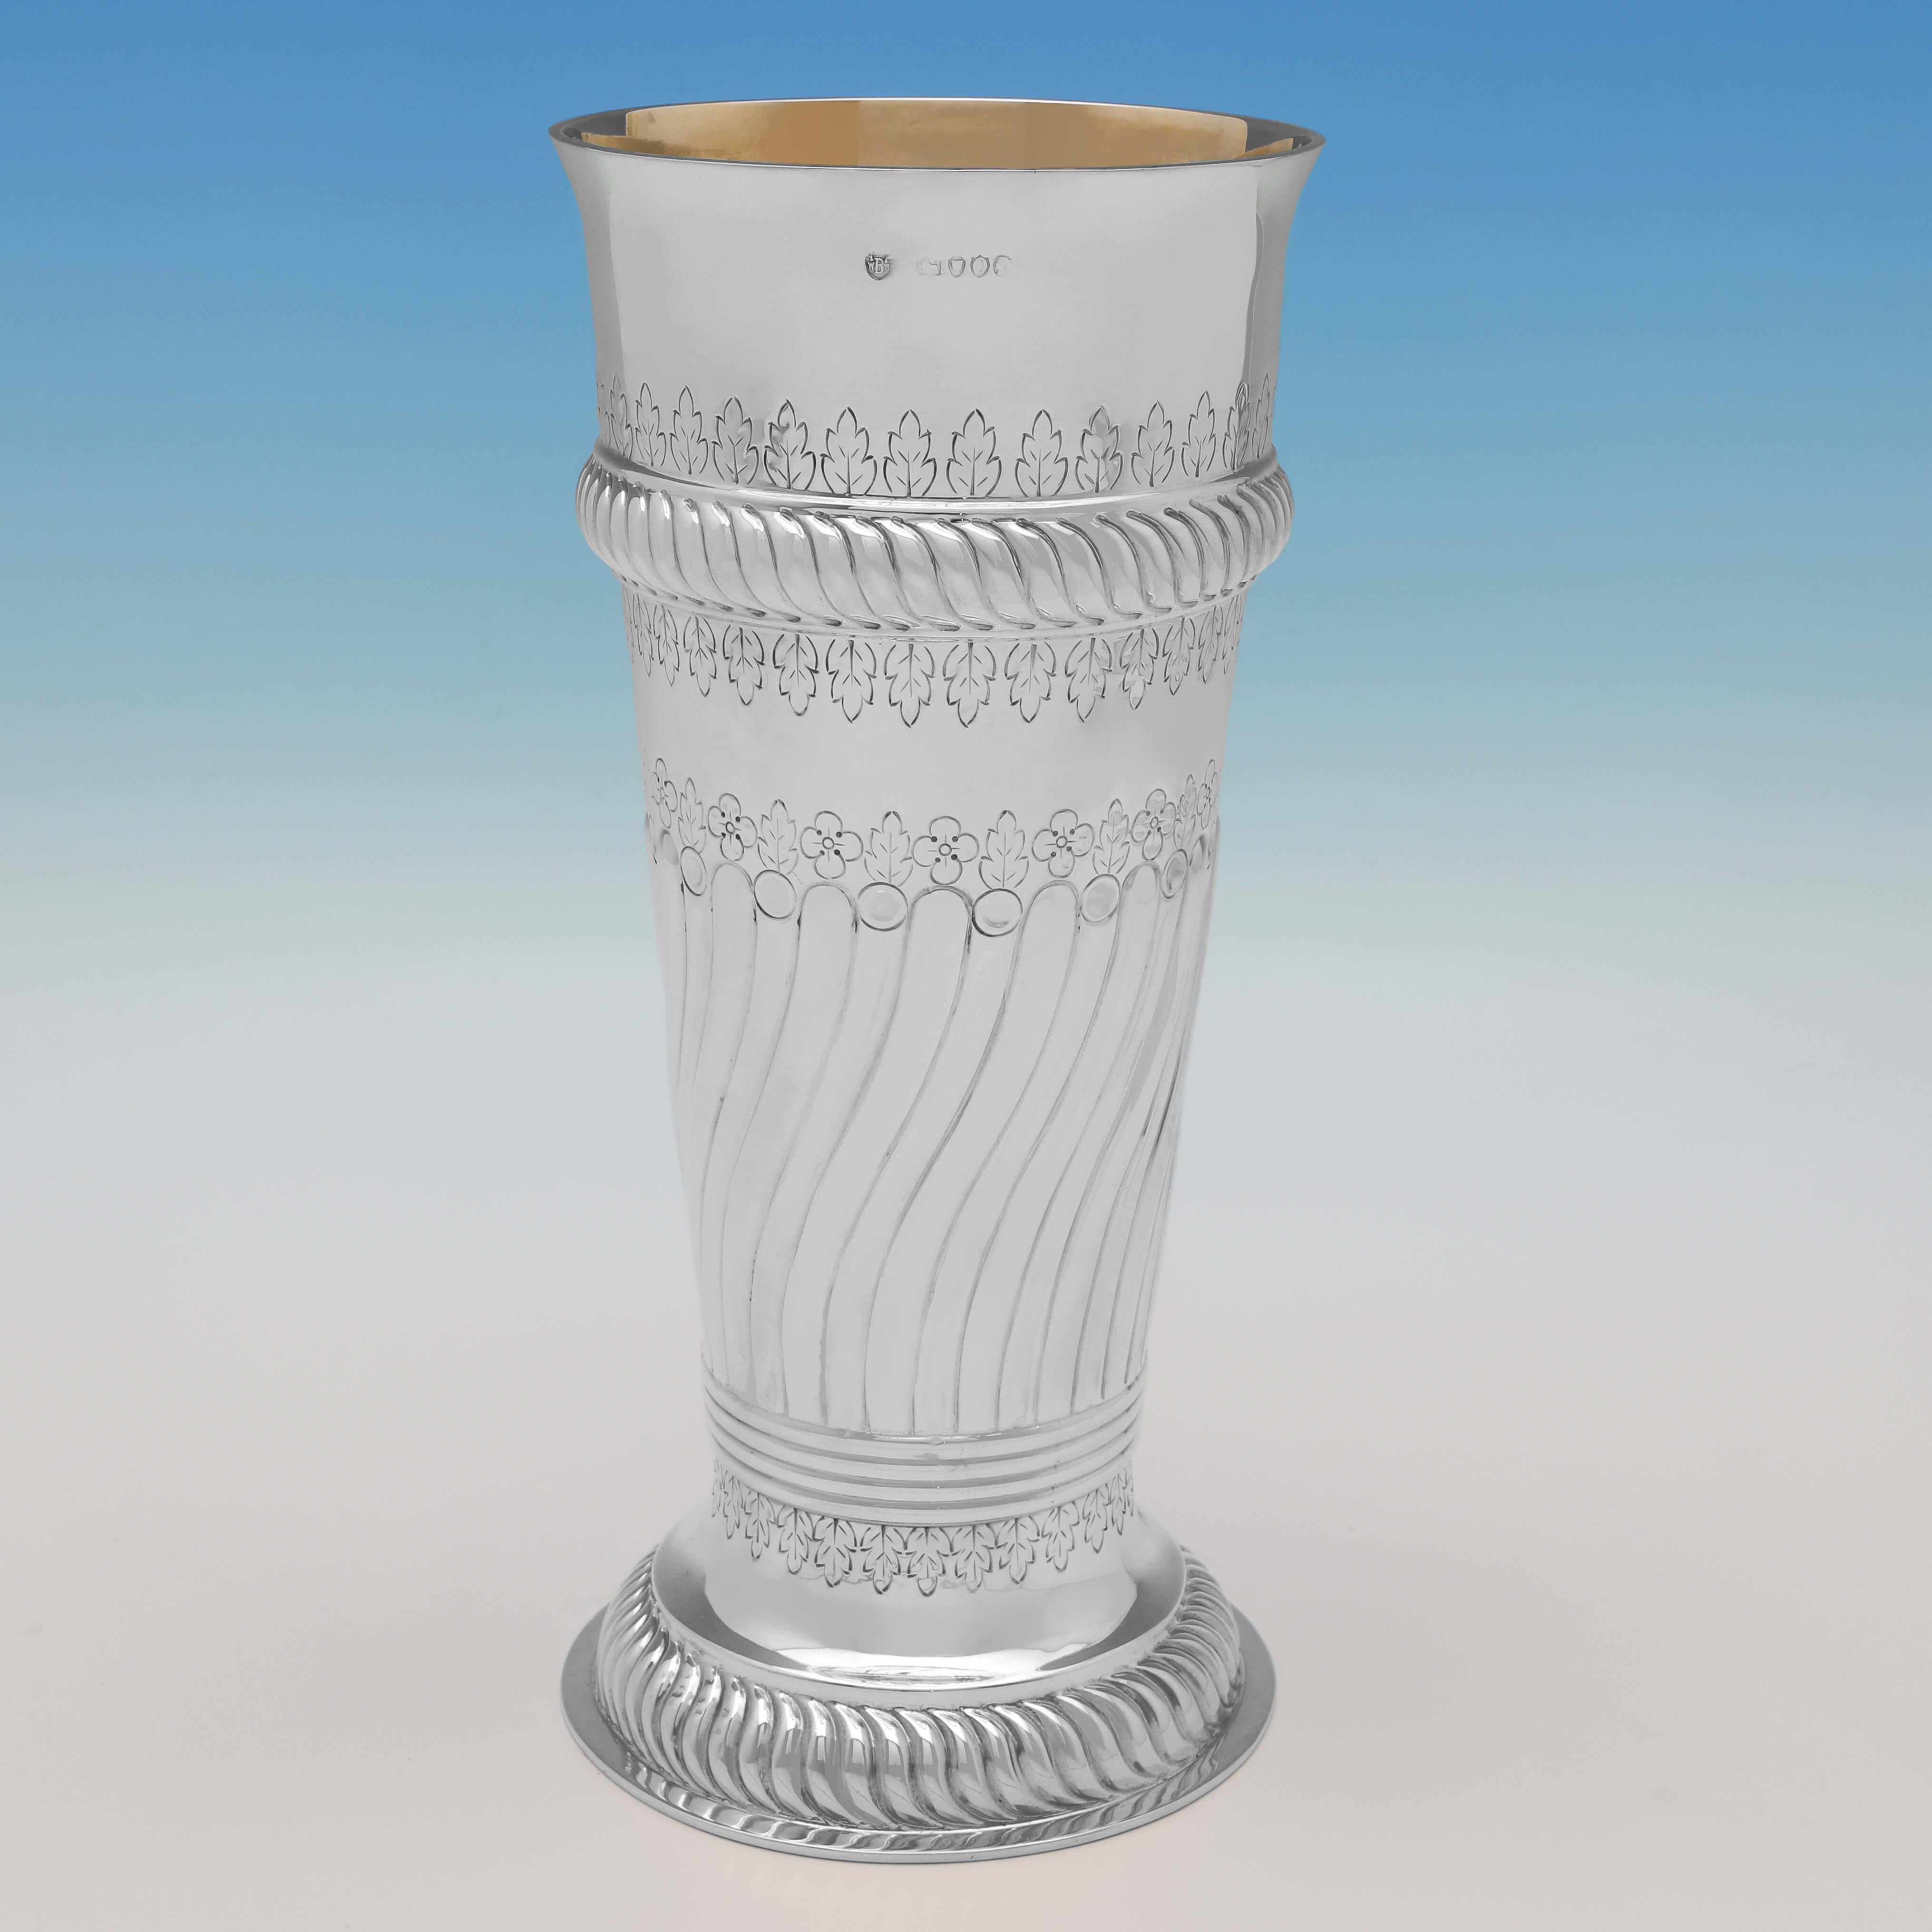 Hallmarked in London in 1889 by Barnards, this attractive, Victorian, Antique Sterling Silver Vase, features chased and engraved decoration, swirled fluting, a vacant cartouche, and a gilt interior. 

The vase measures 10